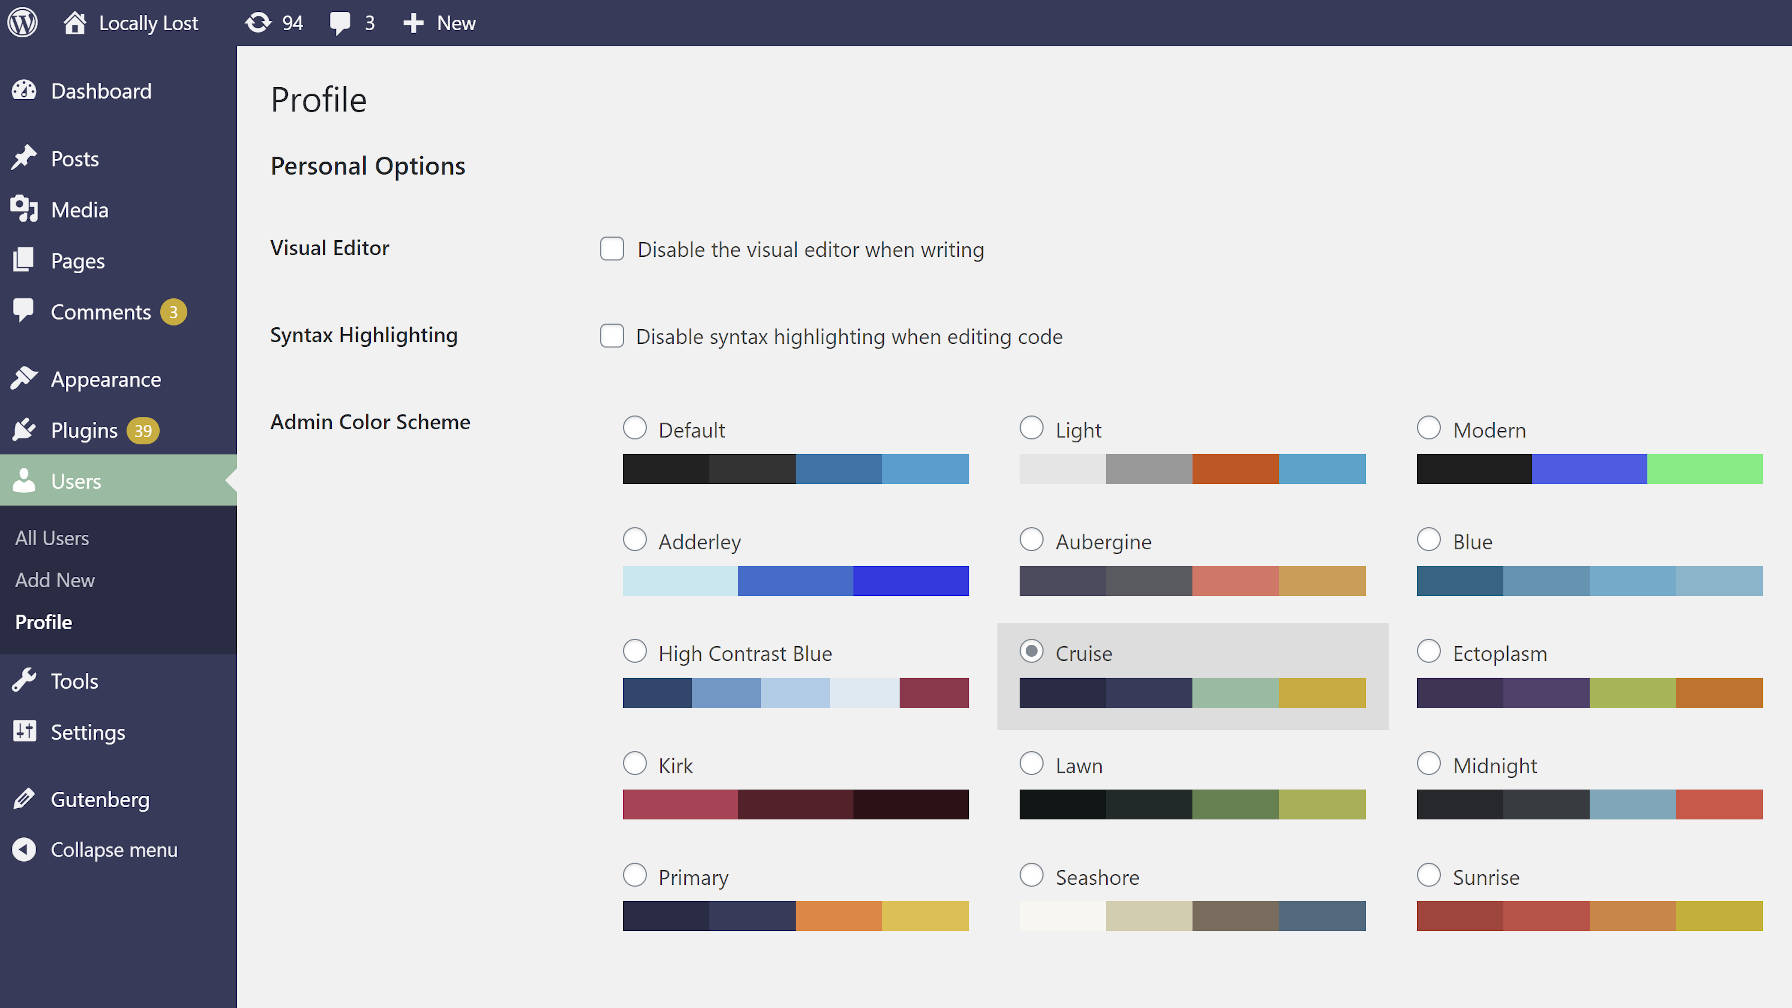 Using the Cruise color scheme from the Admin Color Schemes WordPress plugin.